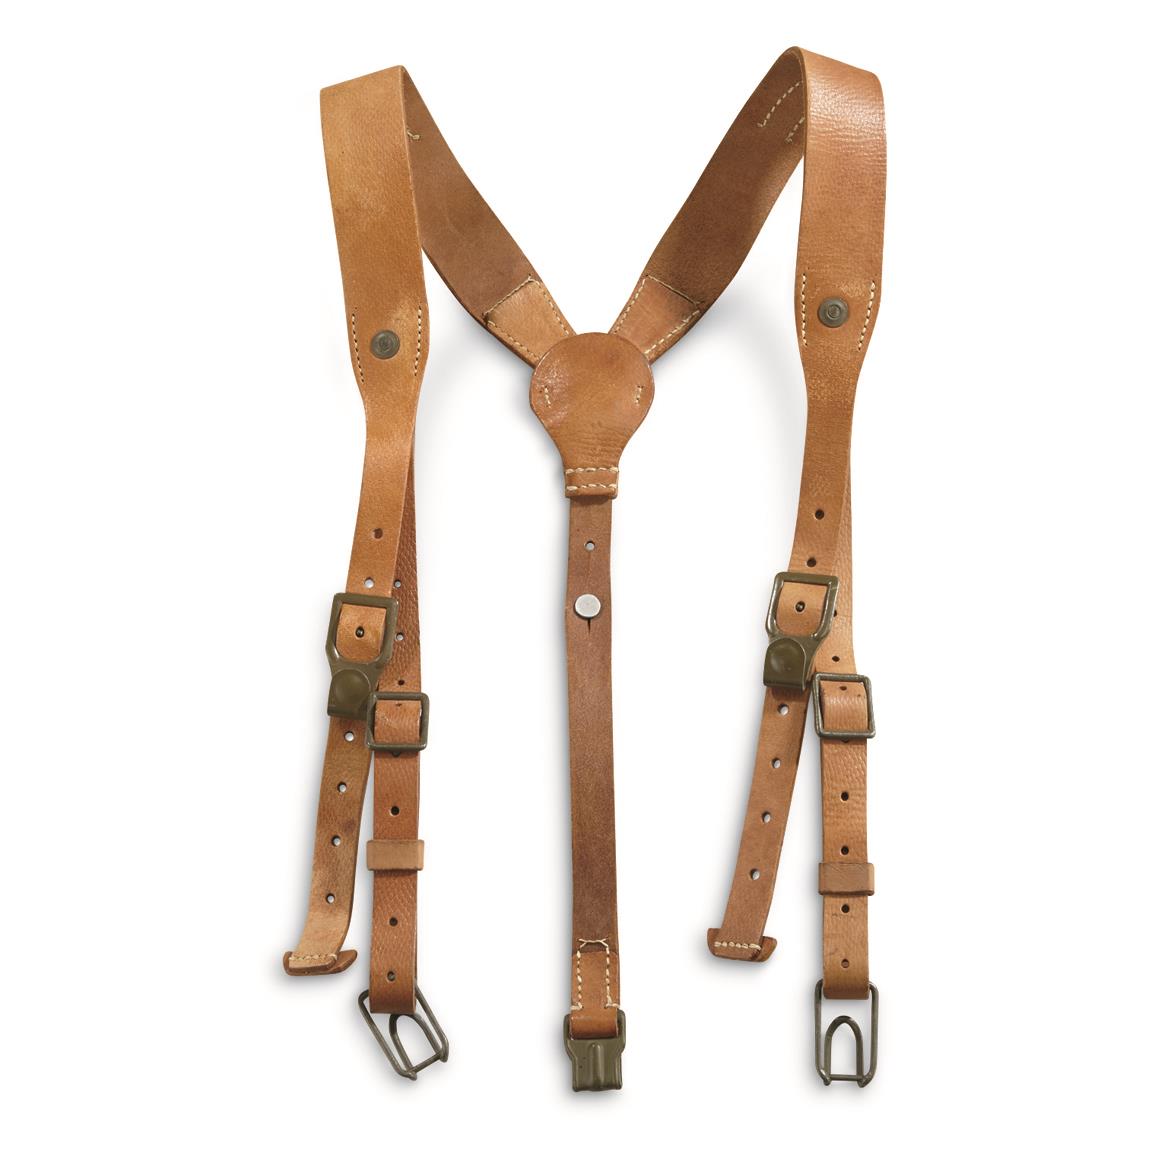 Czech Military Surplus Leather Suspenders, Used